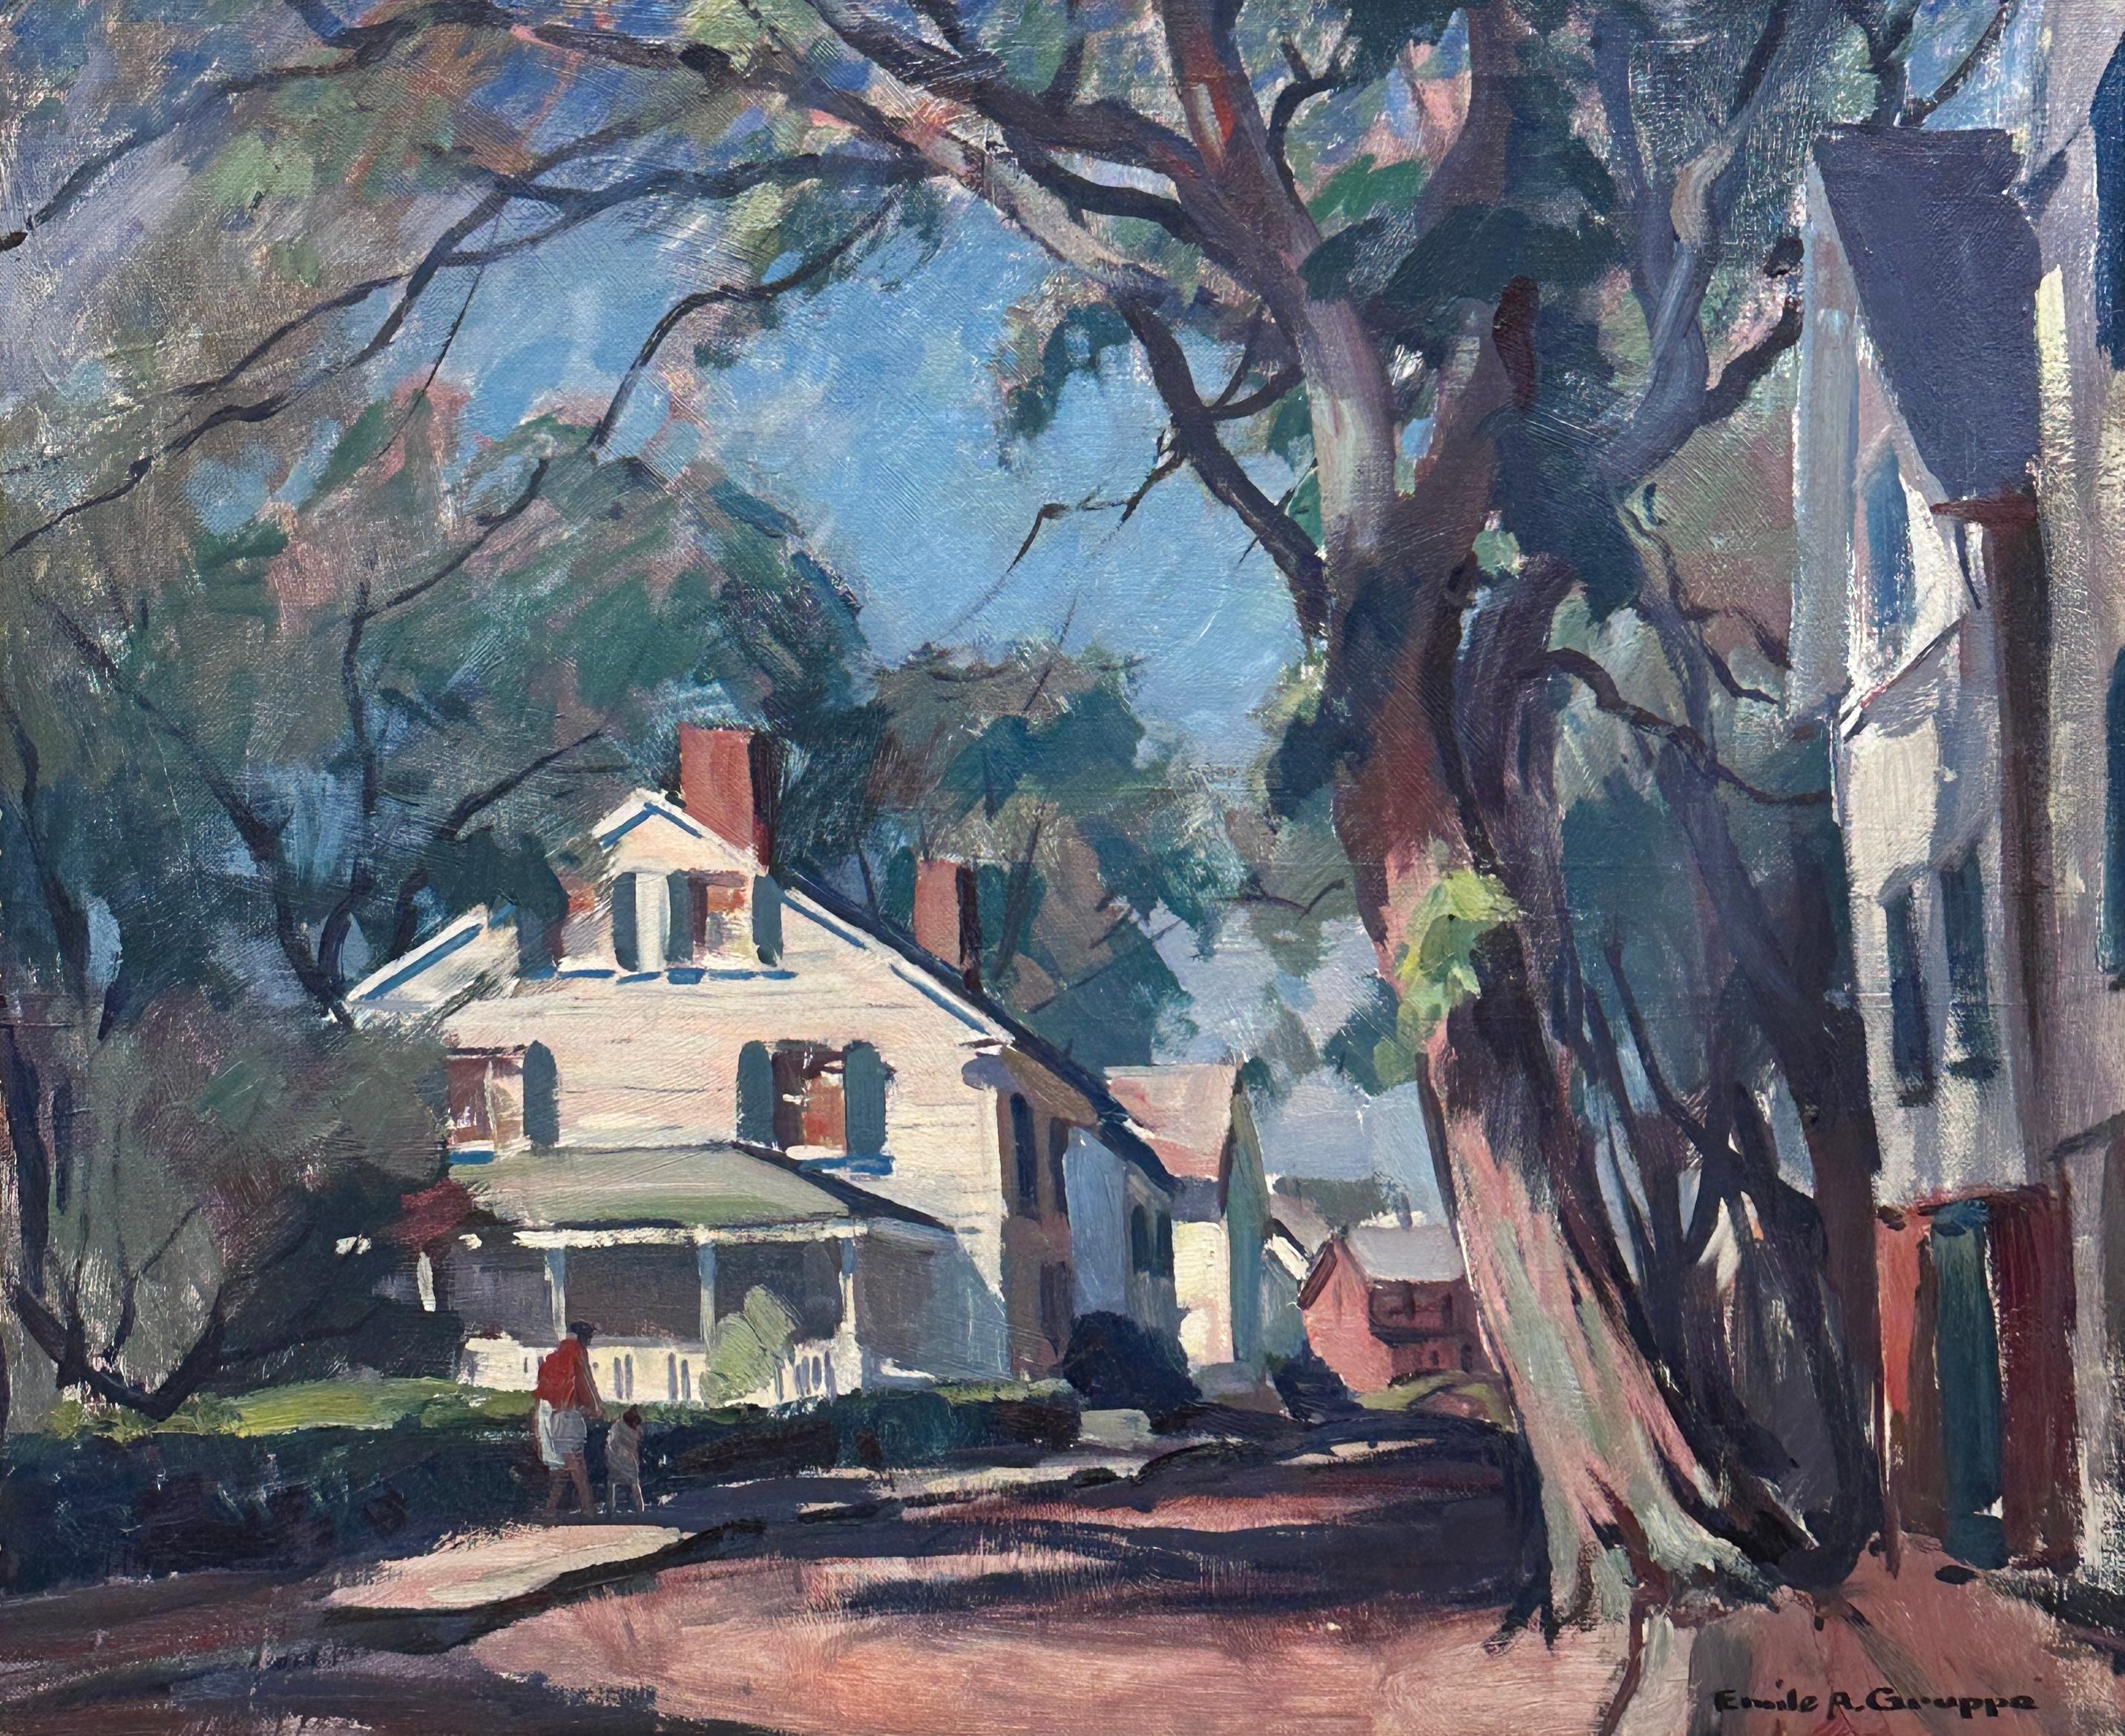 Captivating Rockport Street Scene by Master Emile Gruppe, Renowned Artist of the Cape Ann School. Located at the end of King Street (watch video for reference), this masterpiece encapsulates the essence of the scene, showcasing splendid